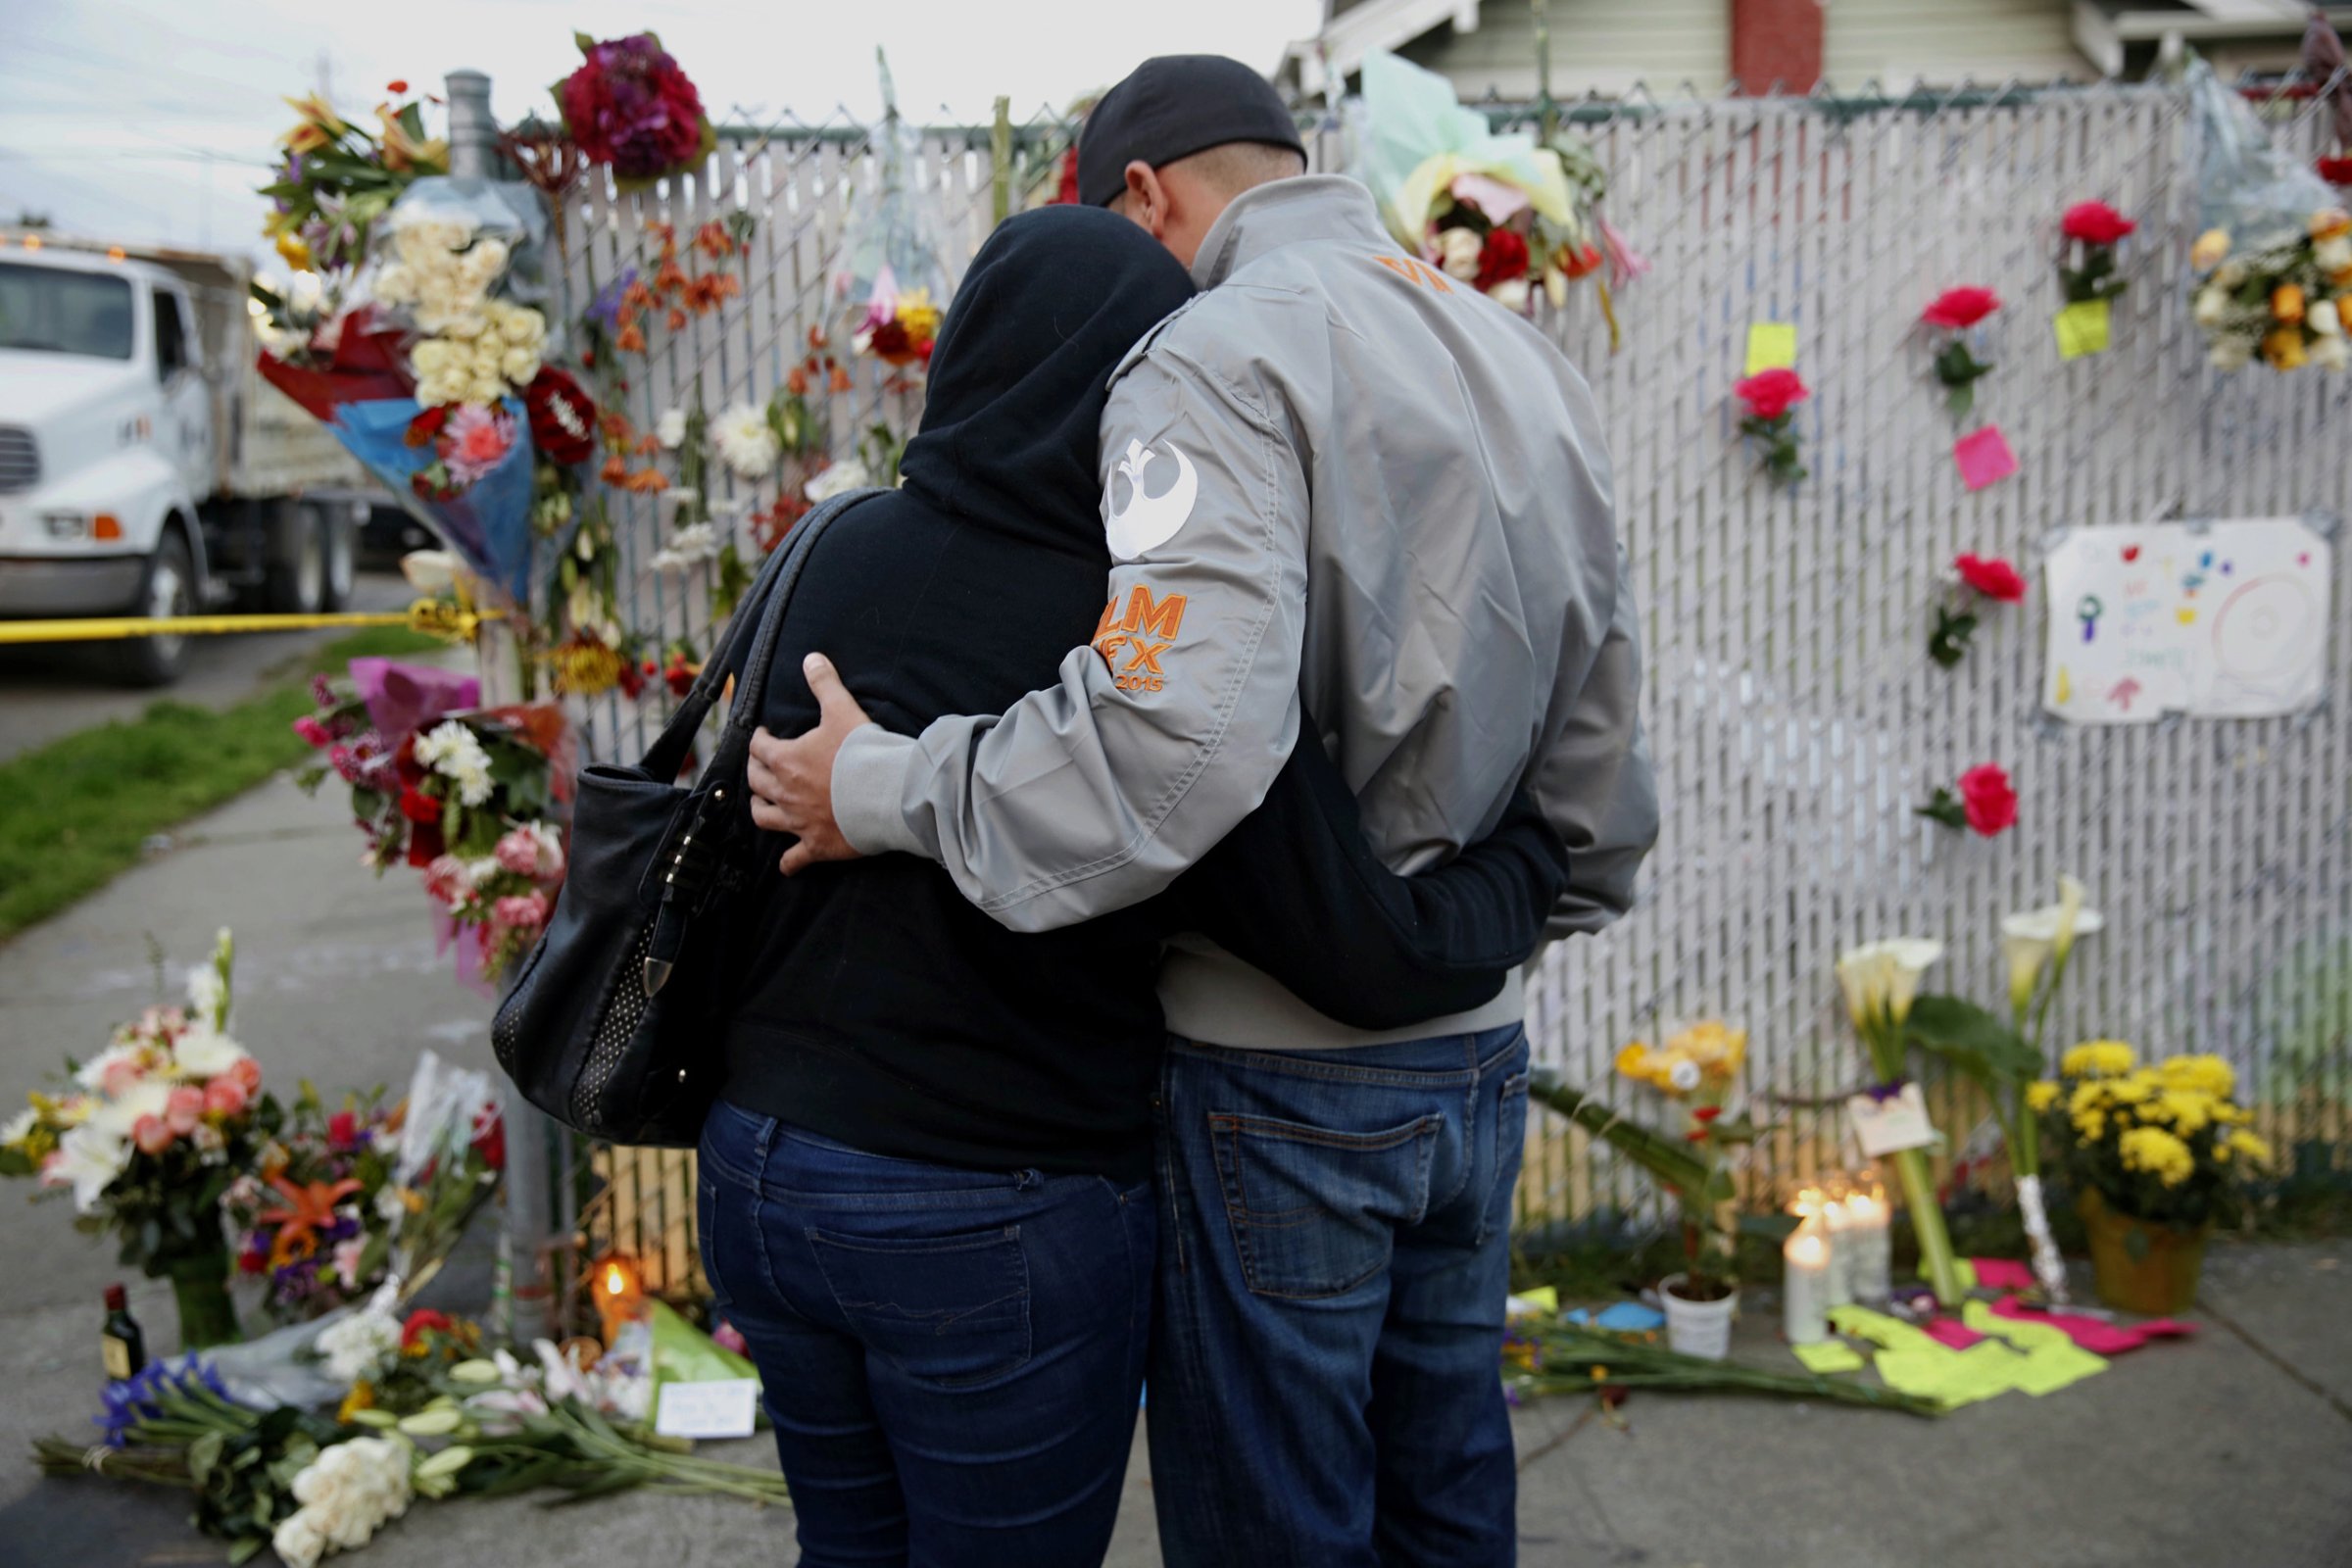 Mourners hug next to flowers near the site of the warehouse fire in Oakland, Calif., on Dec. 4, 2016.